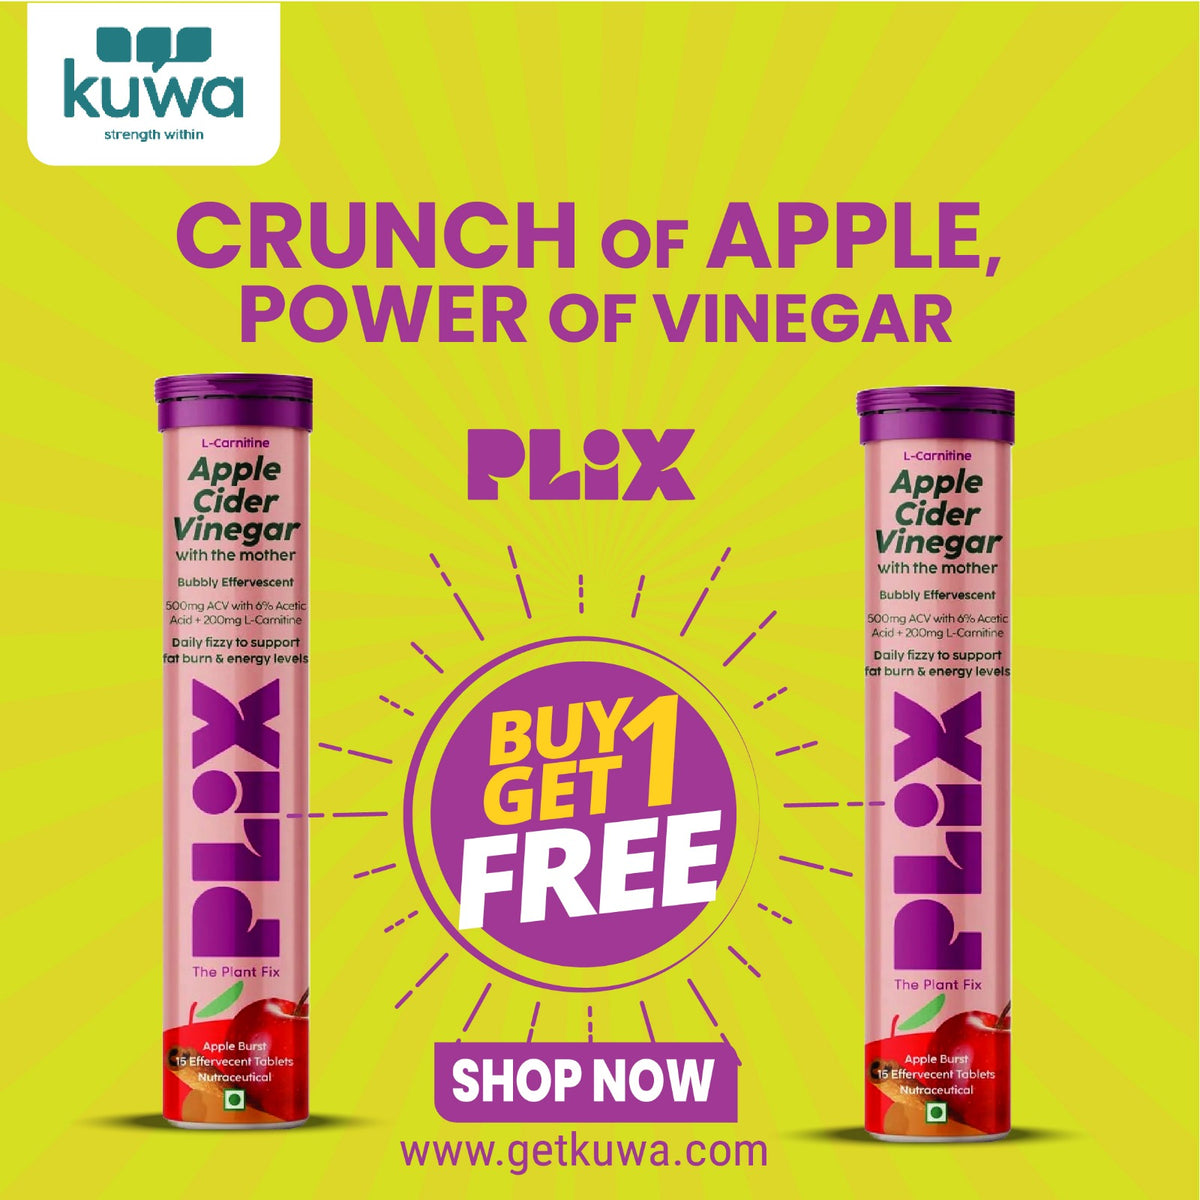 Plix Apple Cider Vinegar Apple Burst purpule Daily Fizzy to support energy levels & weight 15 Effervescent Tablets buy 1 get 1